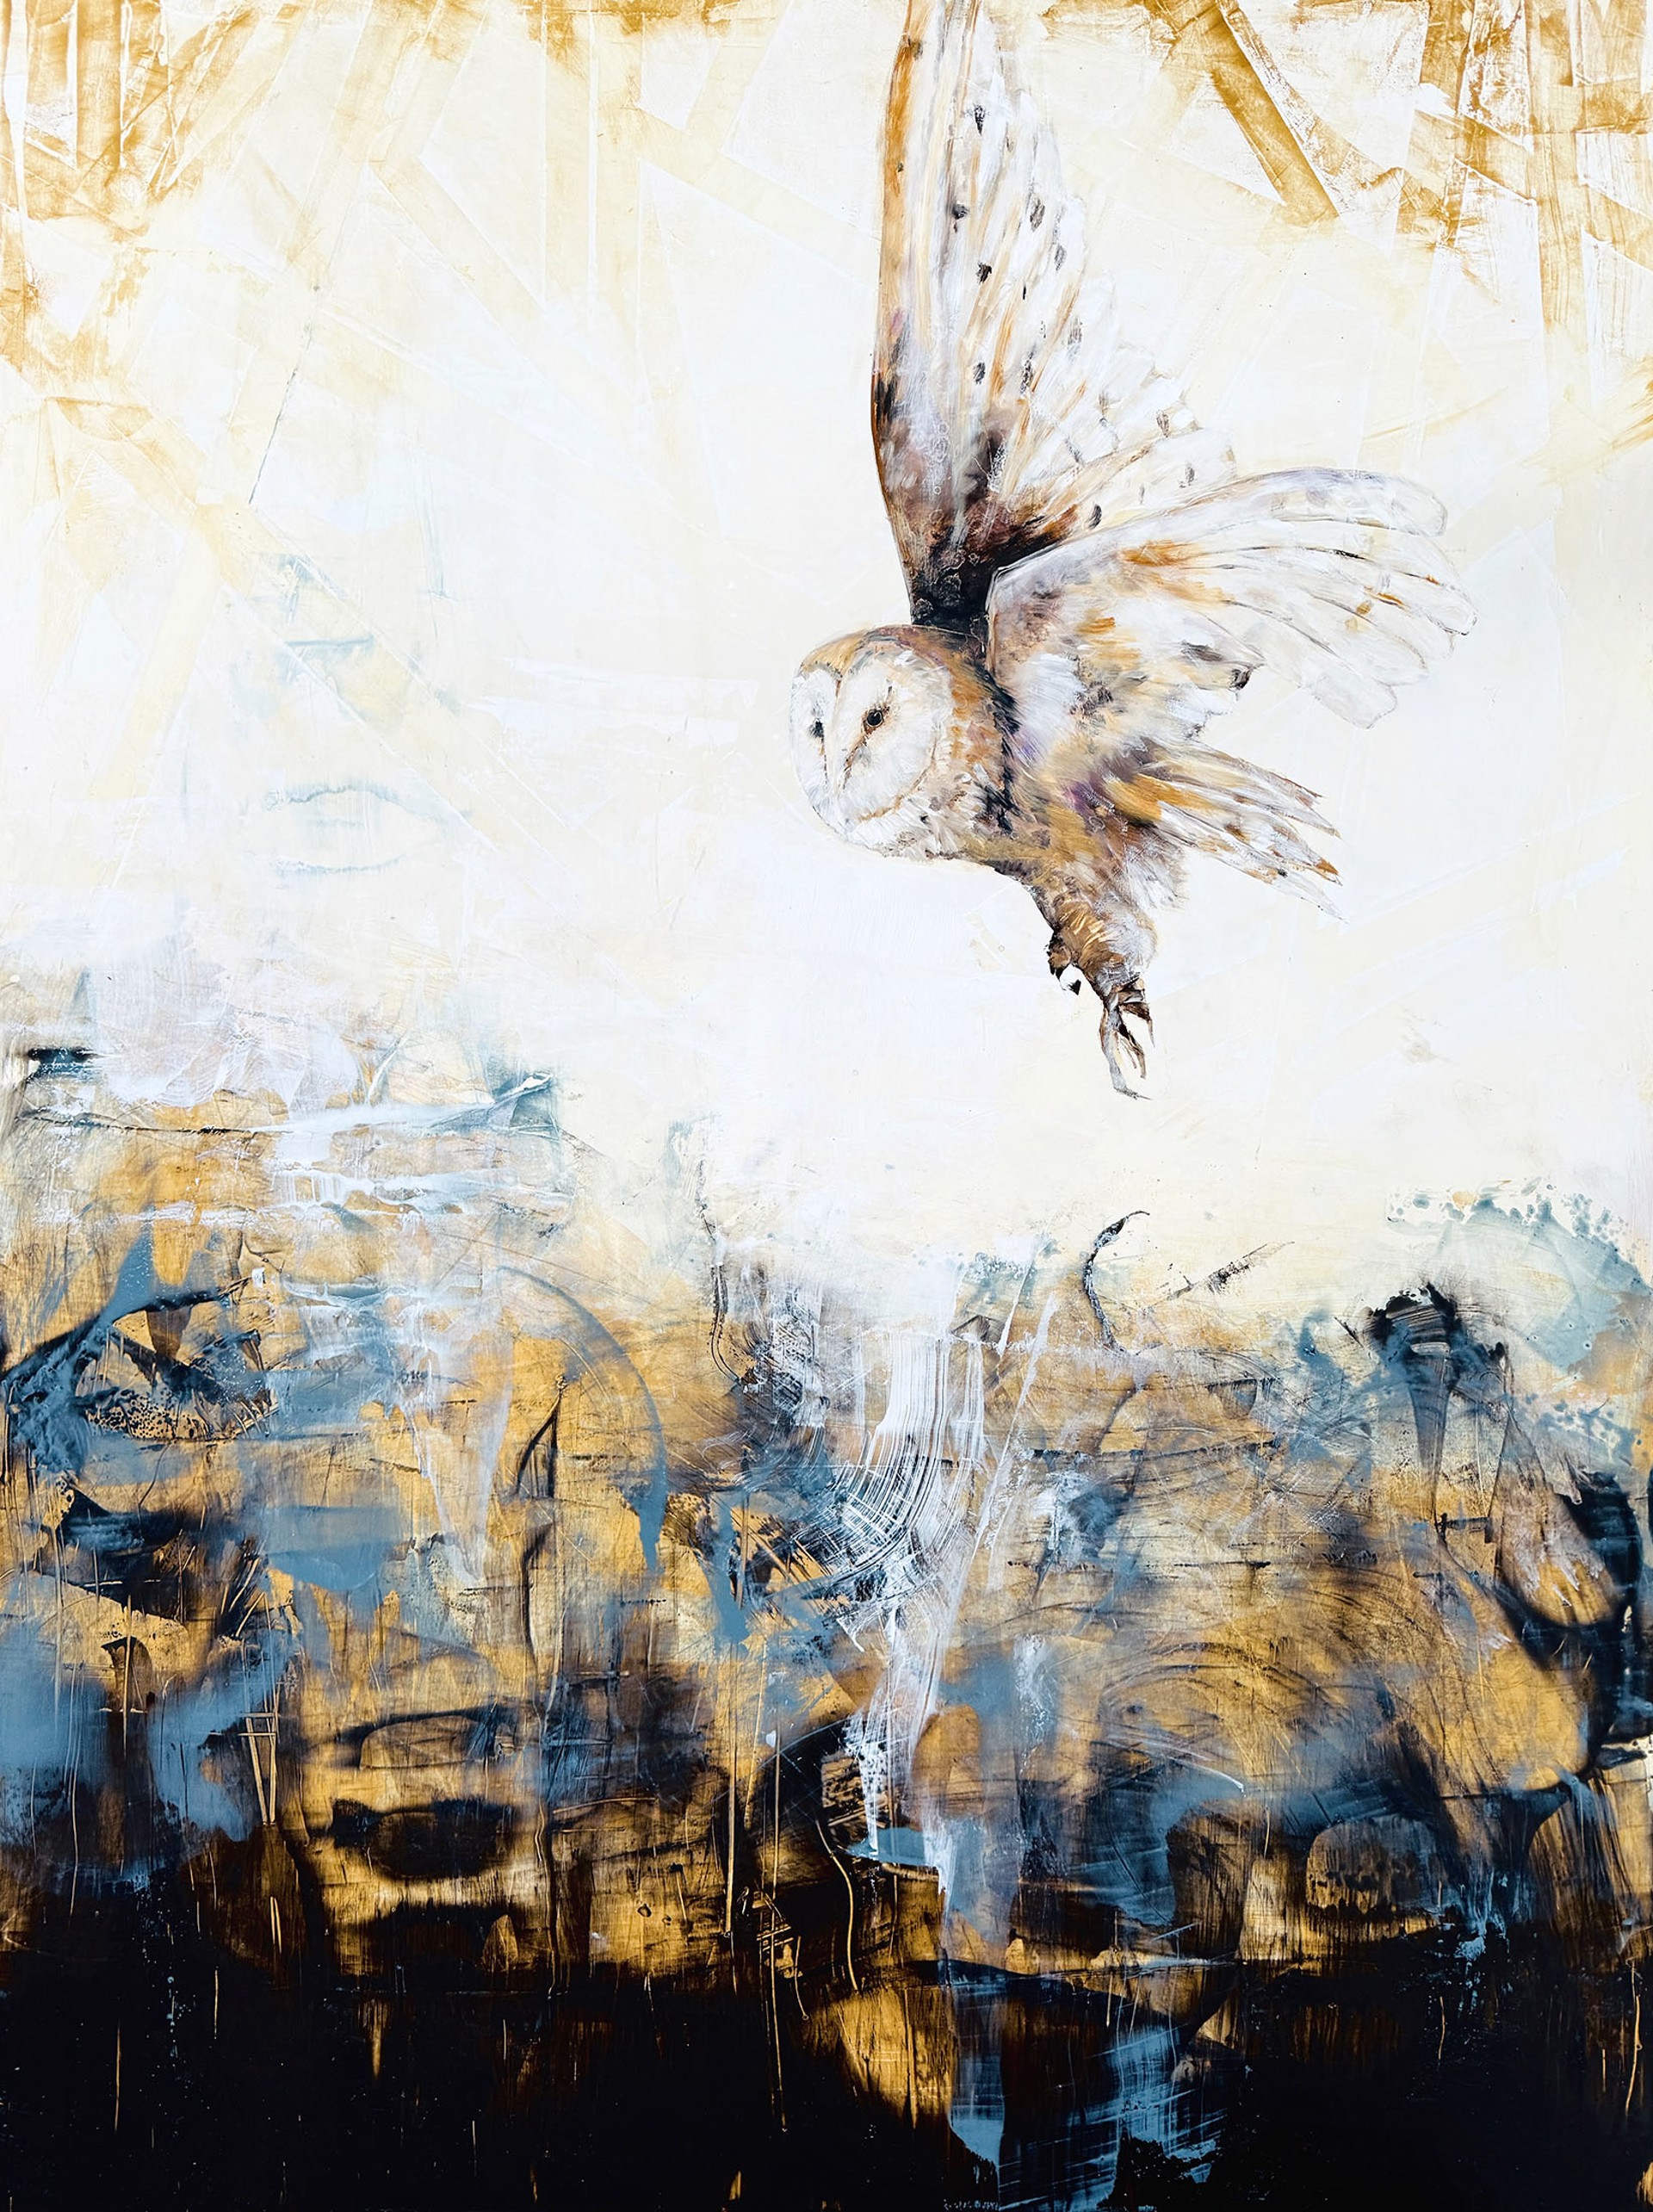 Original Oil Painting By Jenna Von Benedikt Featuring A Snowy Owl Flying Over Abstracted Background